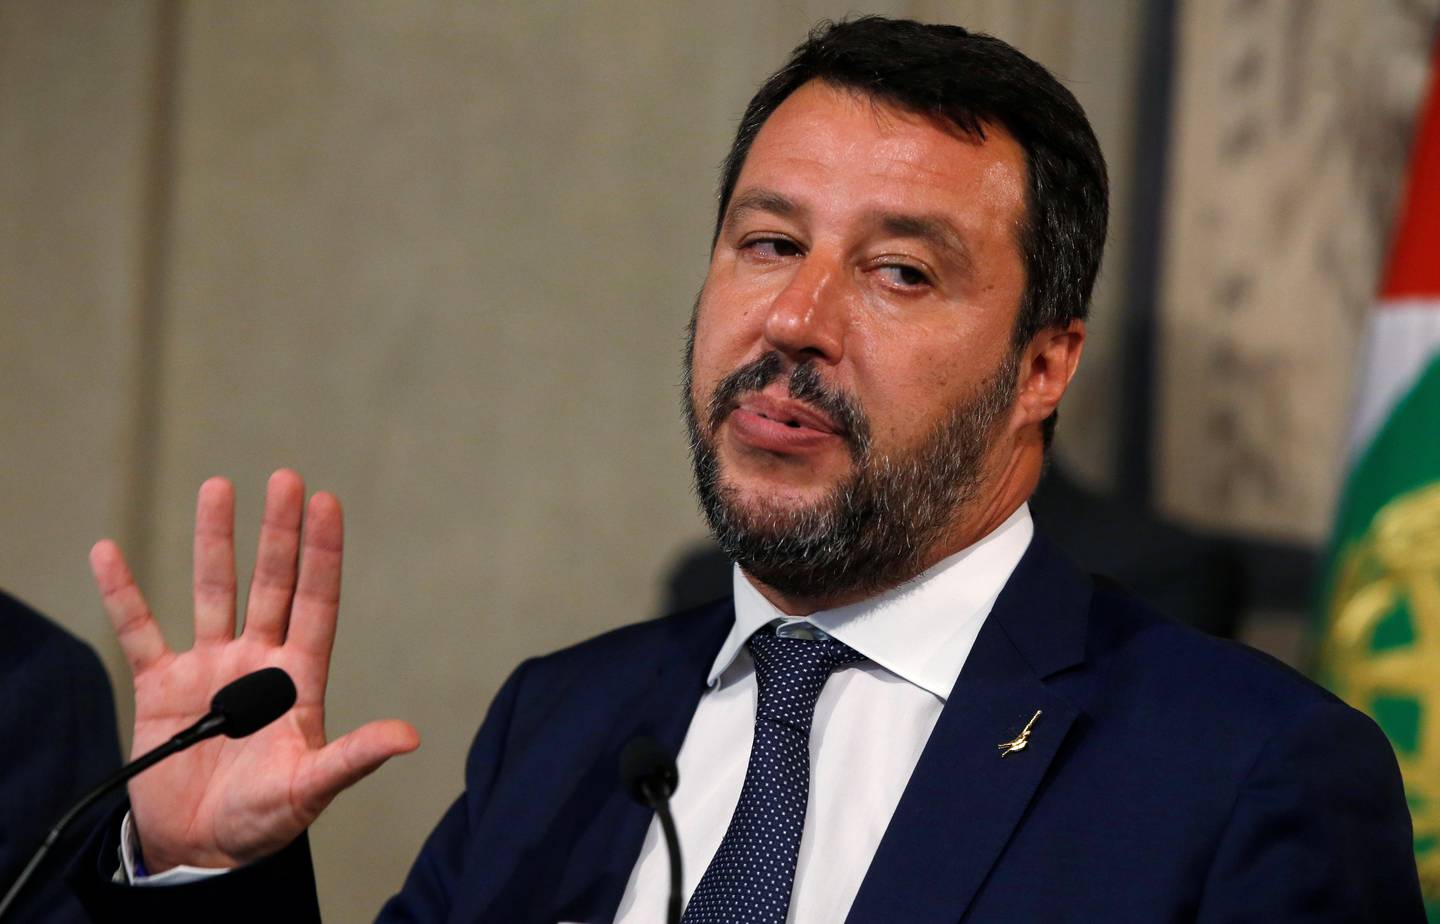 League leader Matteo Salvini gestures as he speaks to the media after consultations with Italian President Sergio Mattarella in Rome, Italy, August 28, 2019. REUTERS/Ciro de Luca